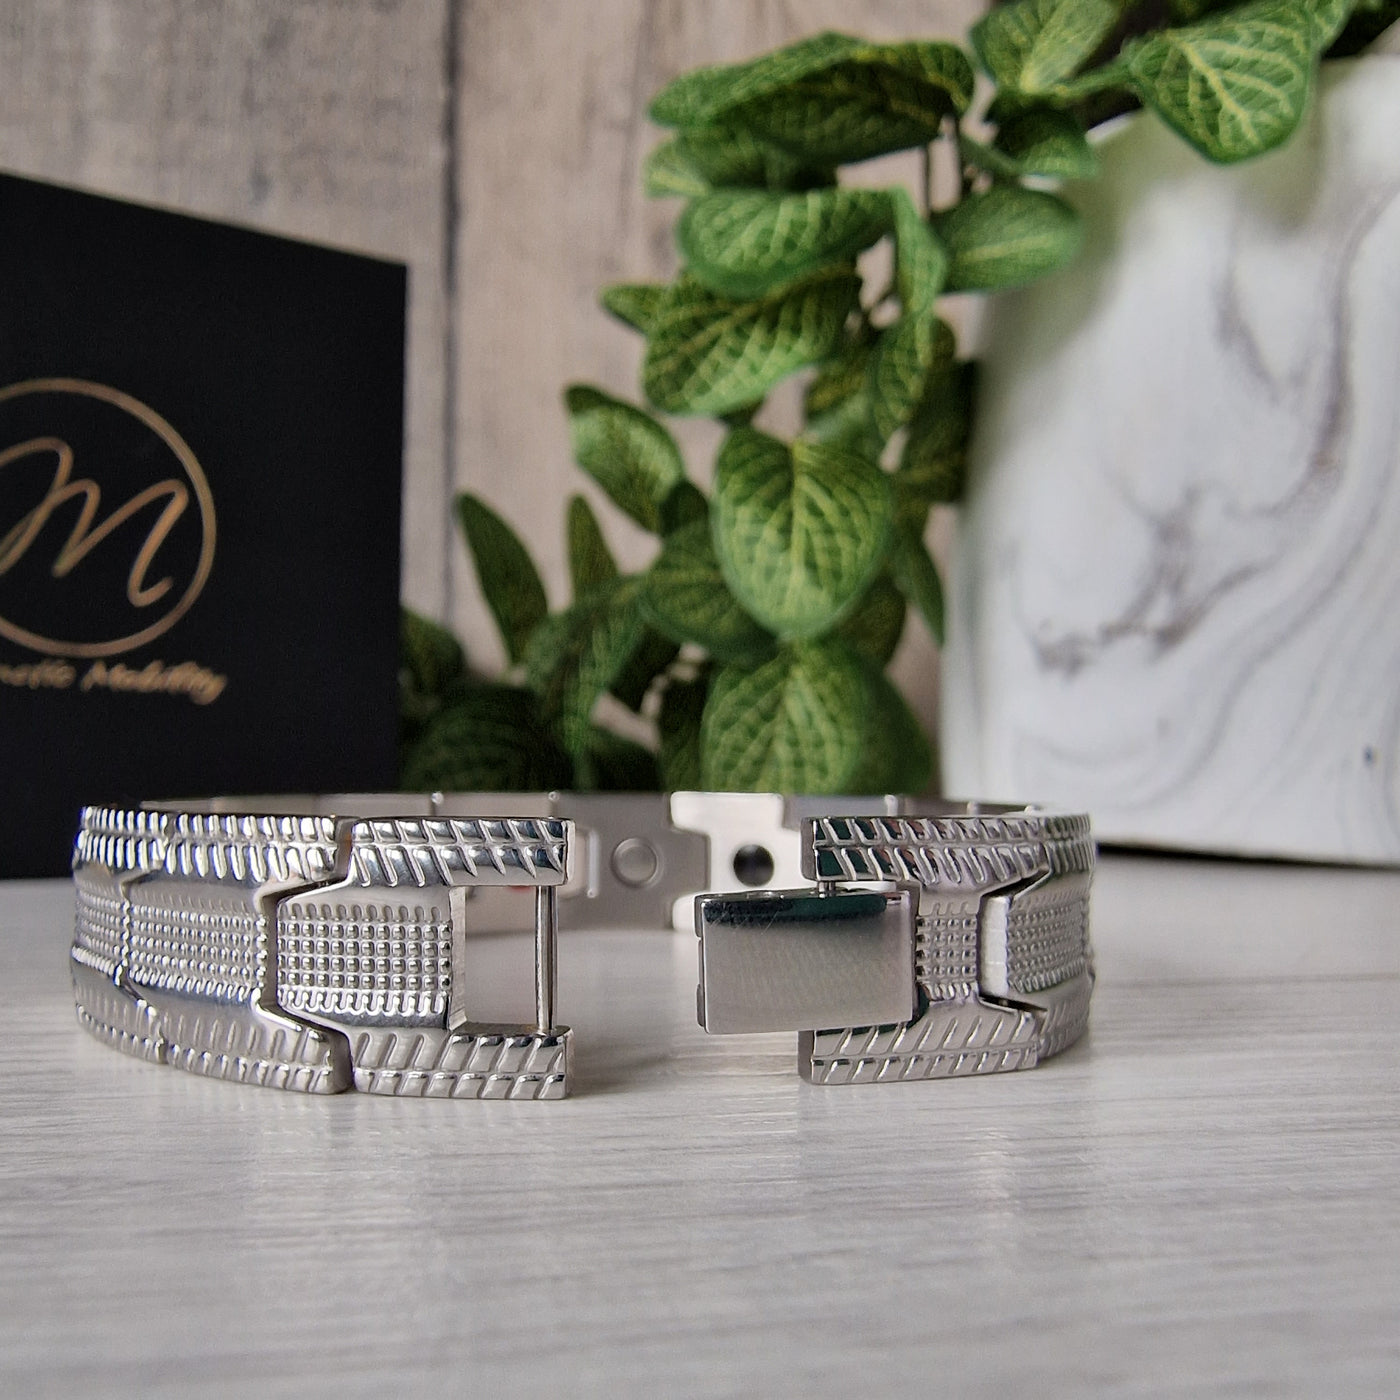 Gentian Star 4in1 Magnetic Bracelet in Silver plated Stainless Steel with a distinctive tire-tread design for arthritis relief. Shows the strong clasp. 